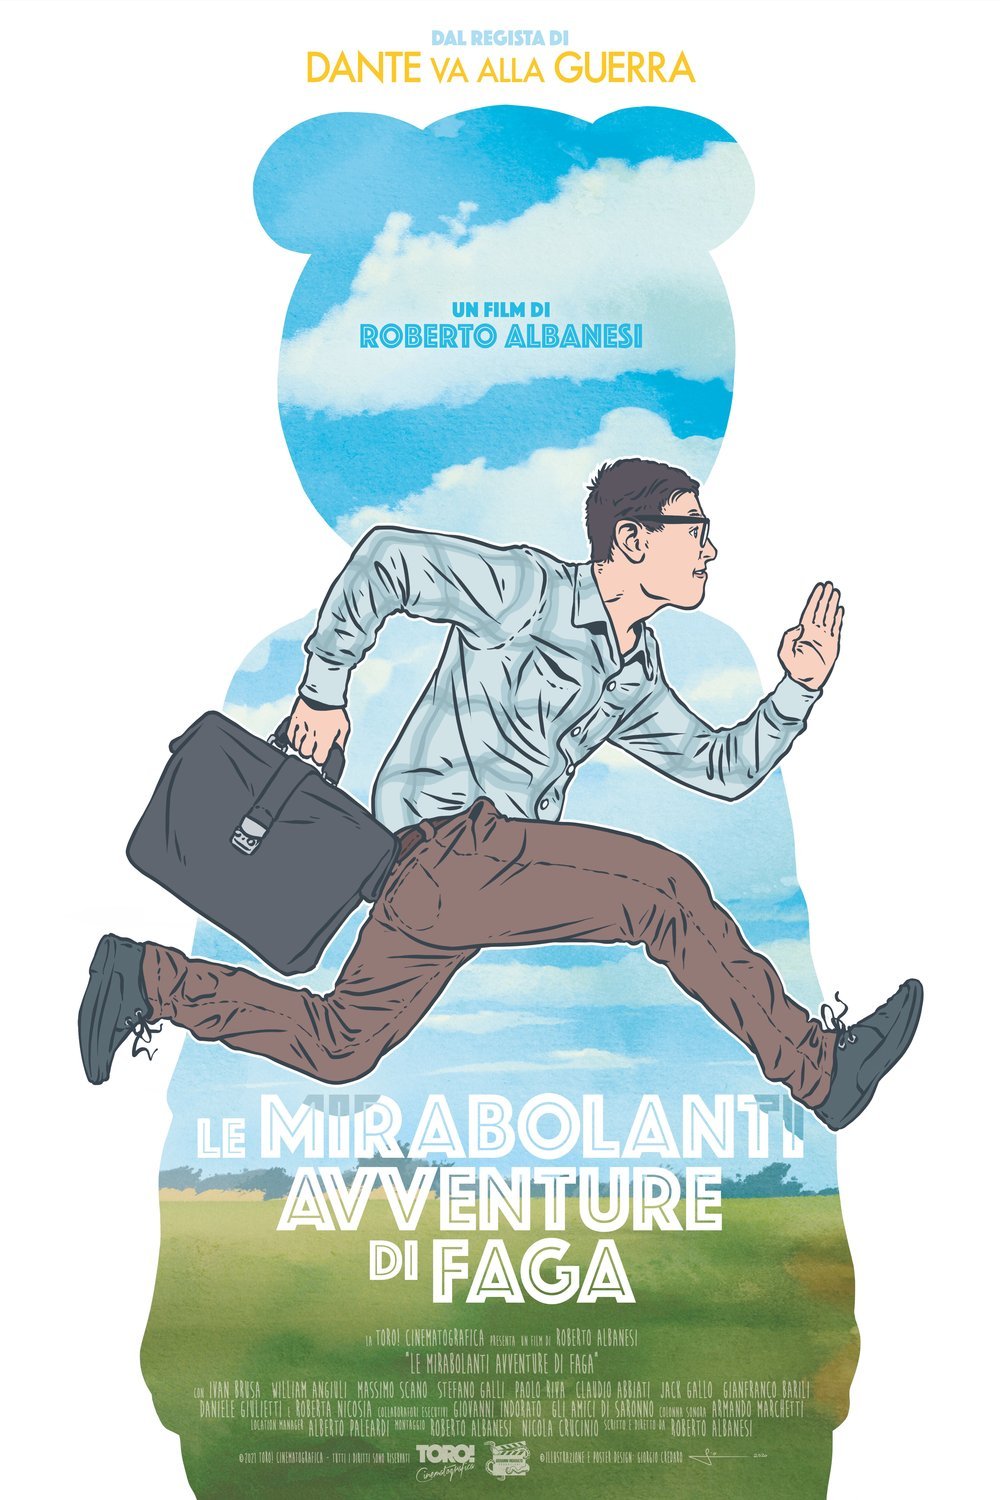 Poster of the movie Amazing Adventures of Faga